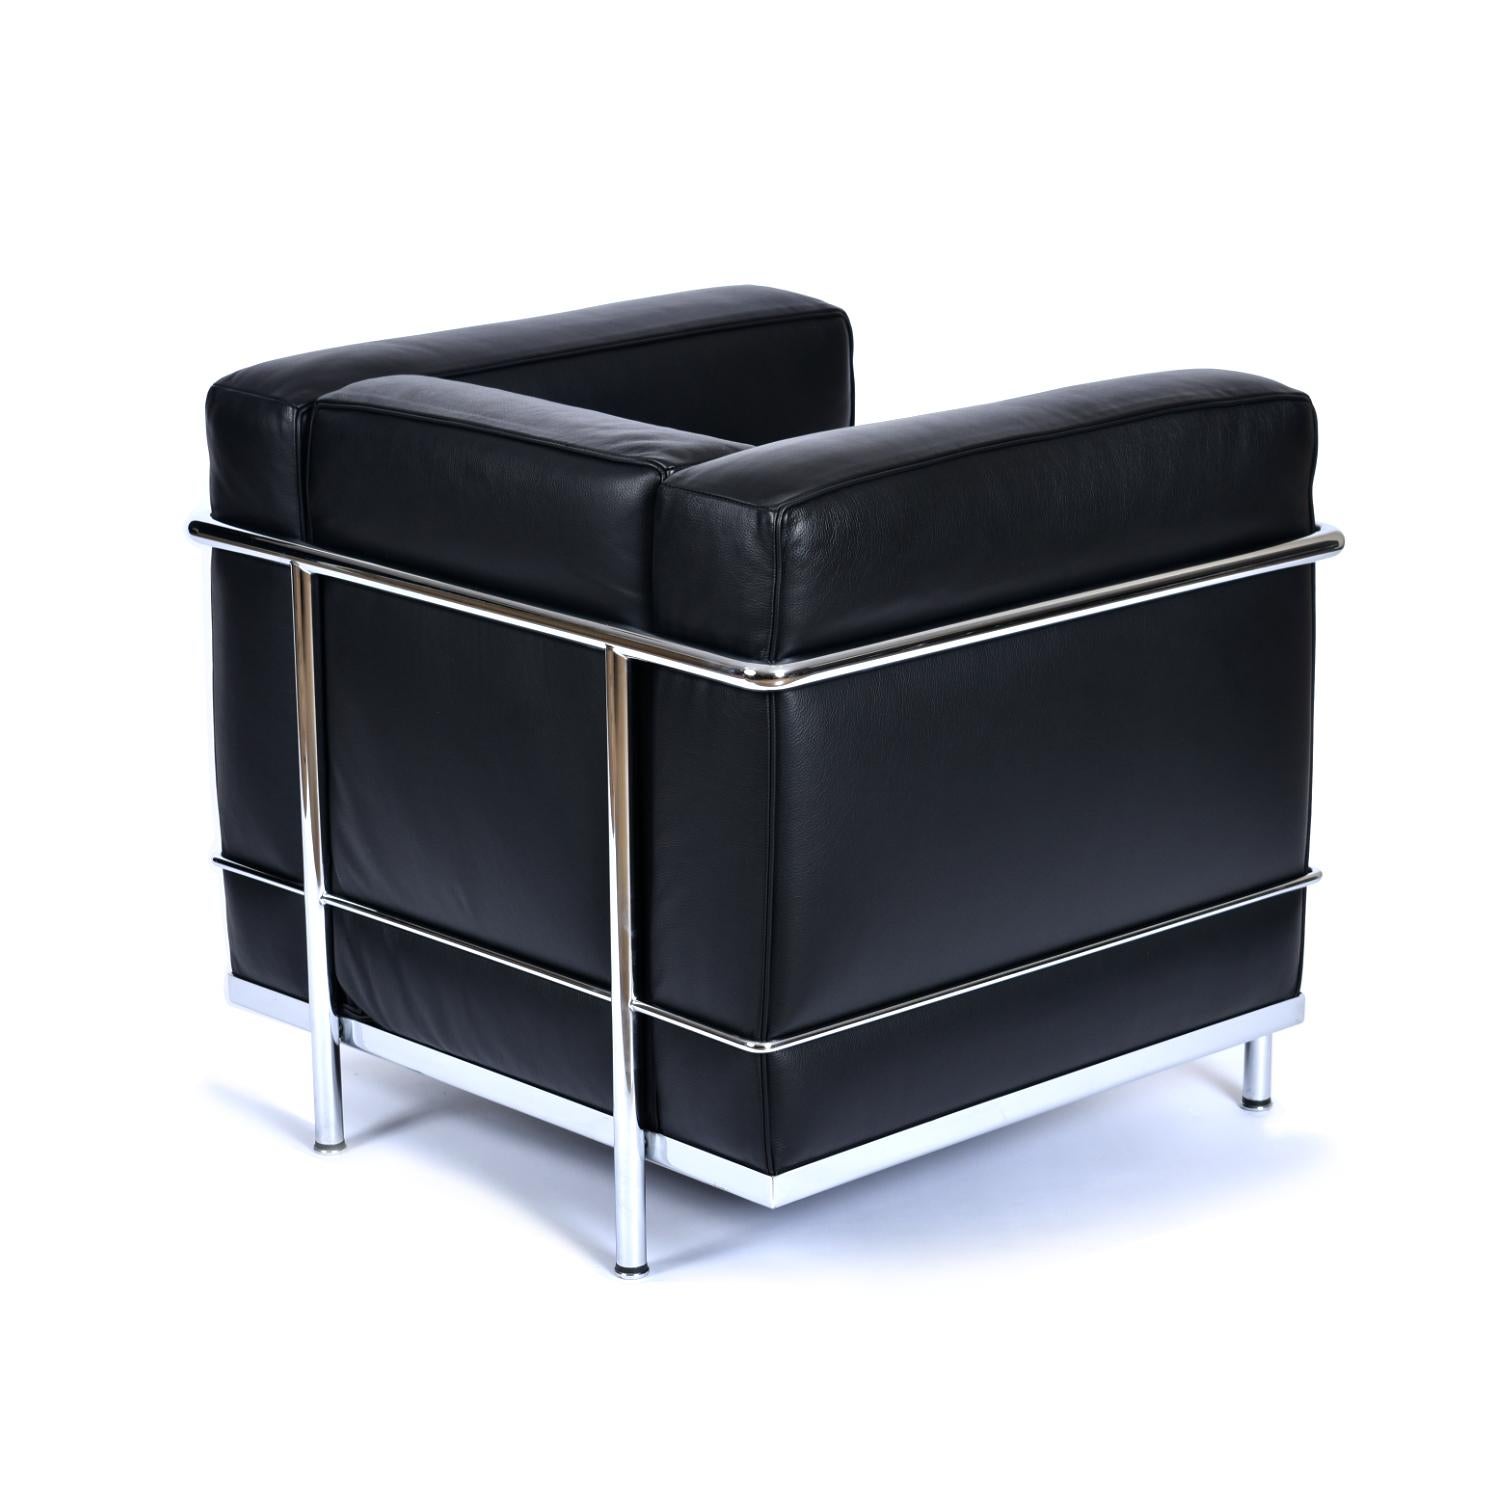 Mid-Century Modern Le Corbusier LC2 Chair by Cassina Made in Italy Chrome and Black Leather